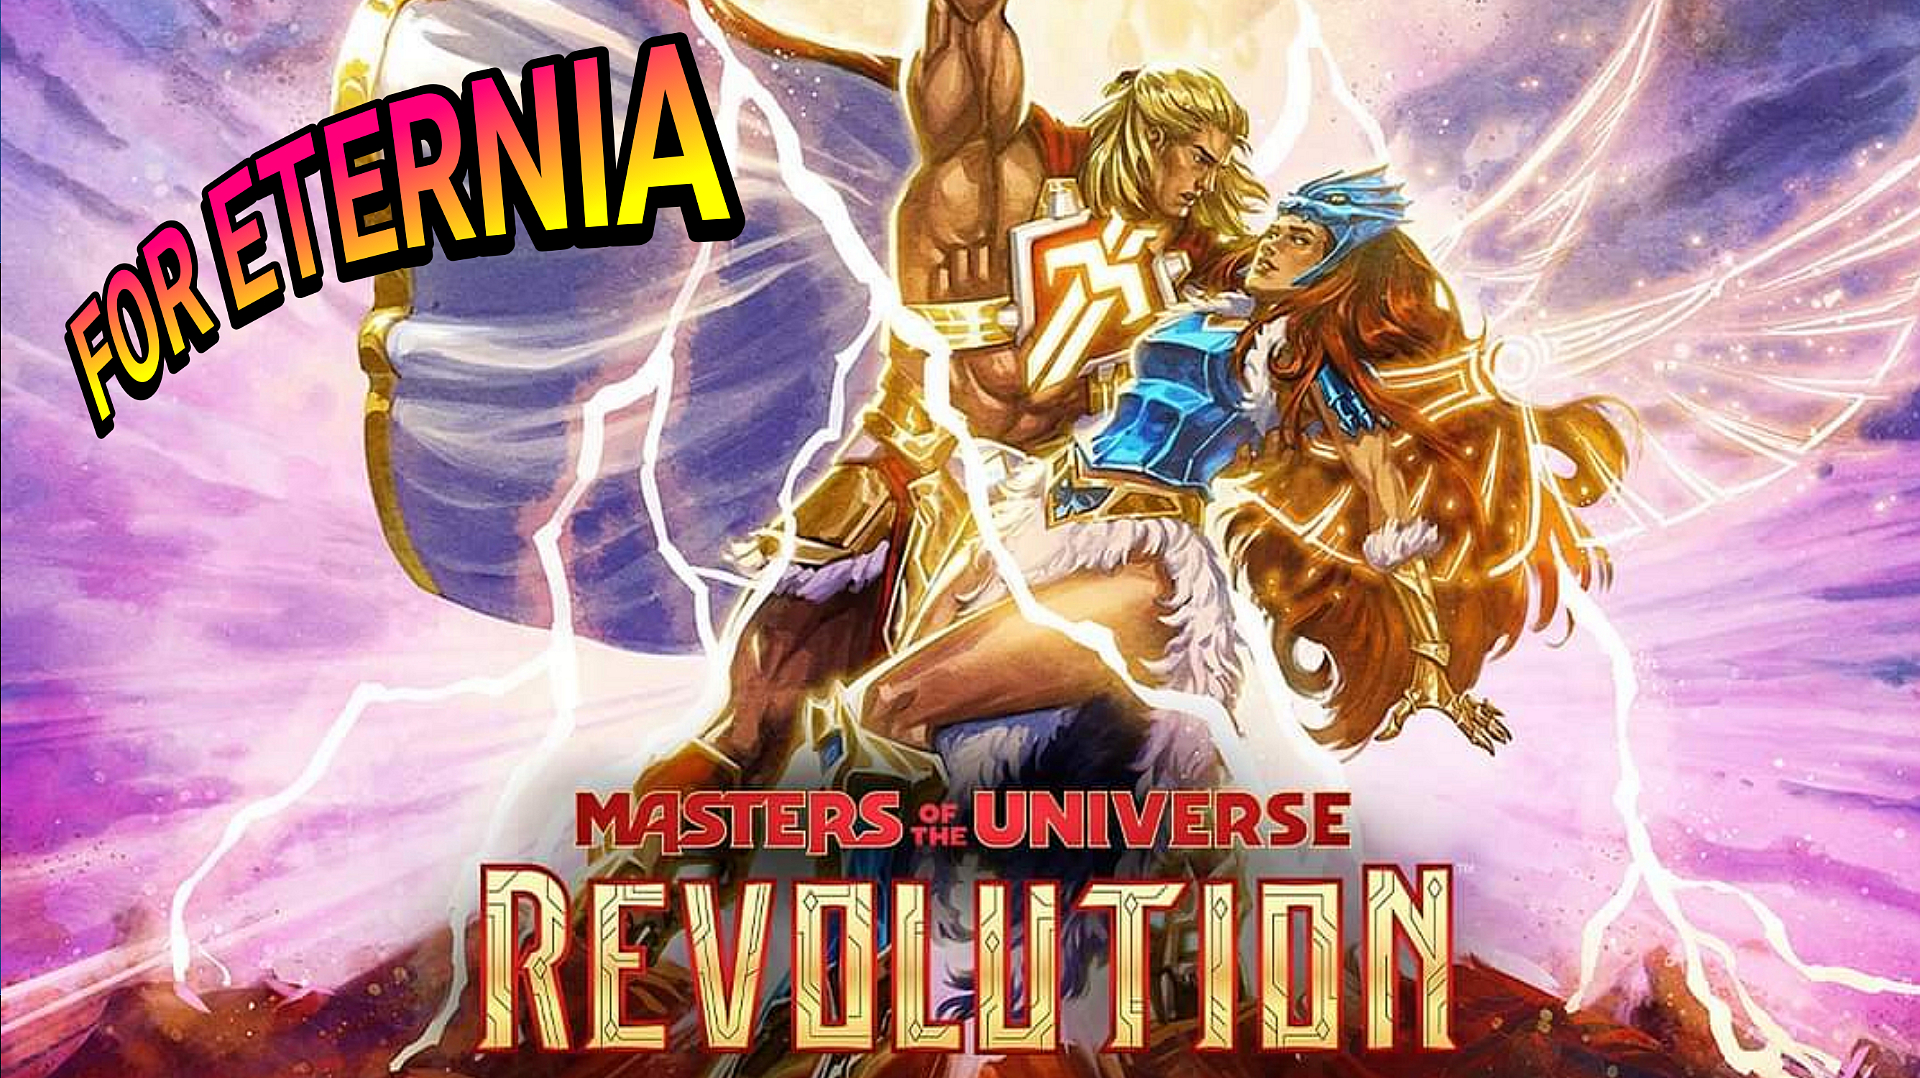 BY THE POWER OF GRAYSKULL! New Promotional Poster for ”Masters of the Universe: Revolution” is released